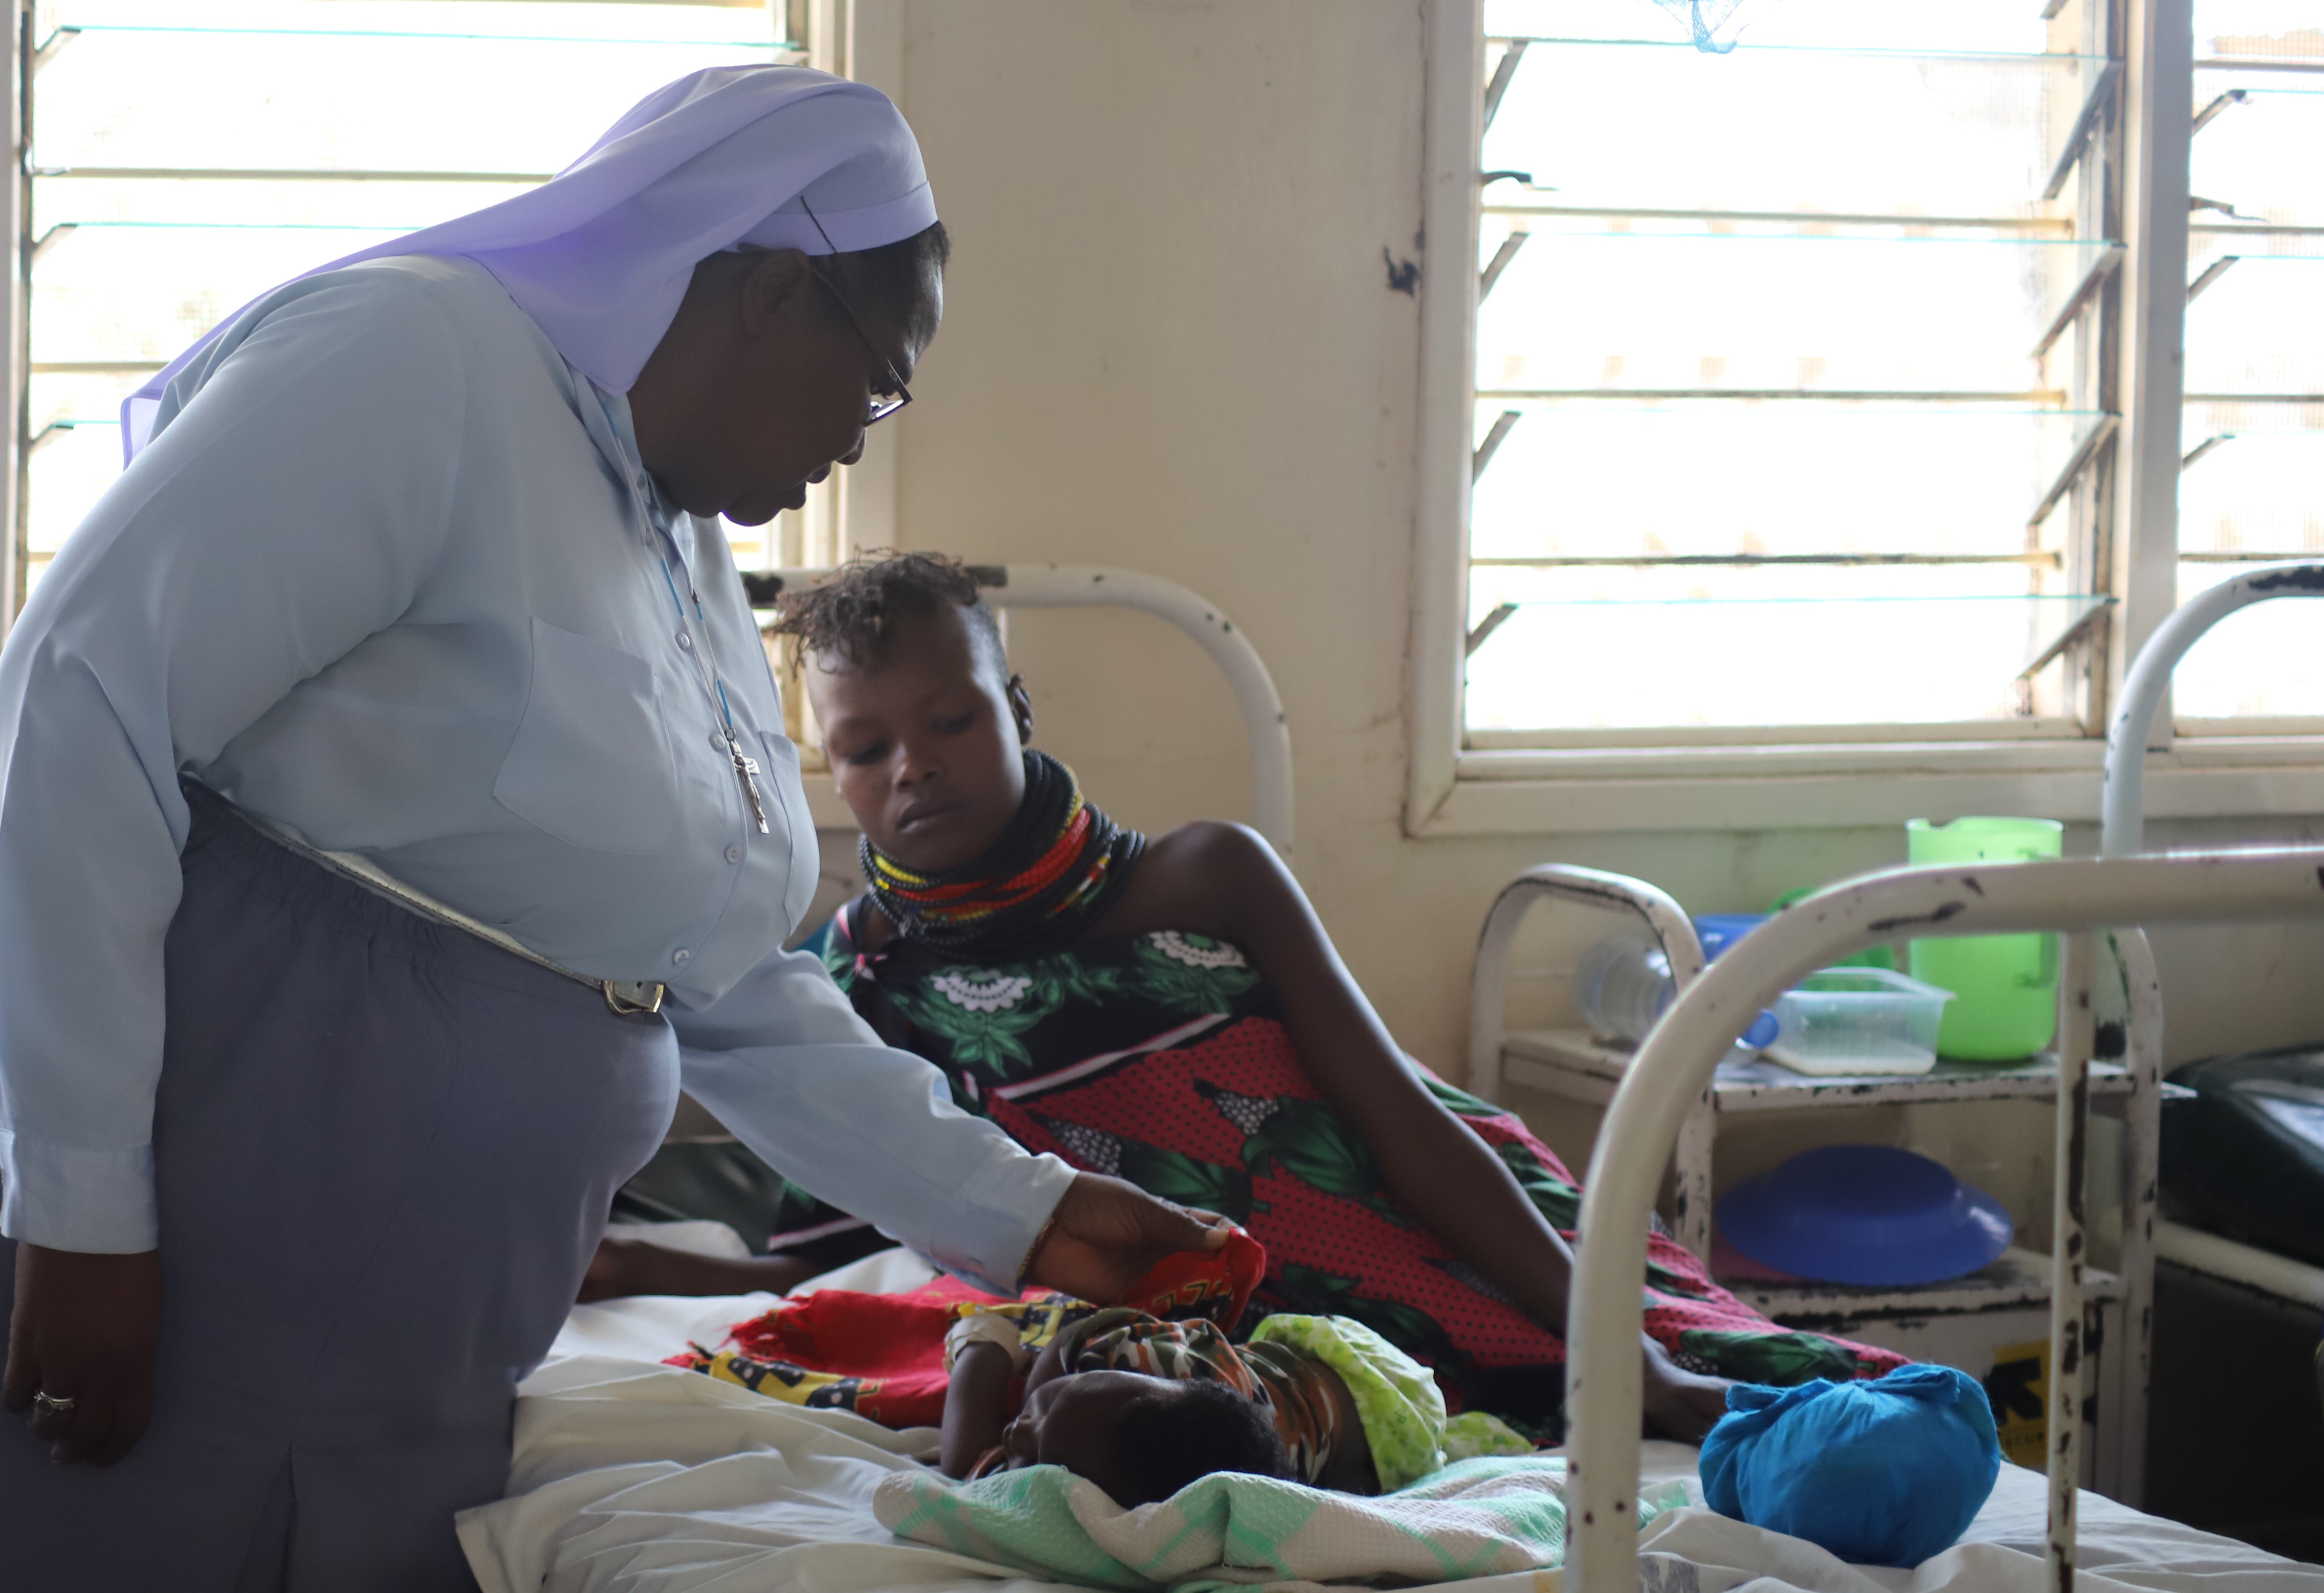 Photo 2: Sr. Petronella Mueni examines a sick baby admitted at the Kakuma Mission Hospital in February. The hospital in northwest Kenya provides quality health care for refugees and residents. (GSR photo/Doreen Ajiambo)